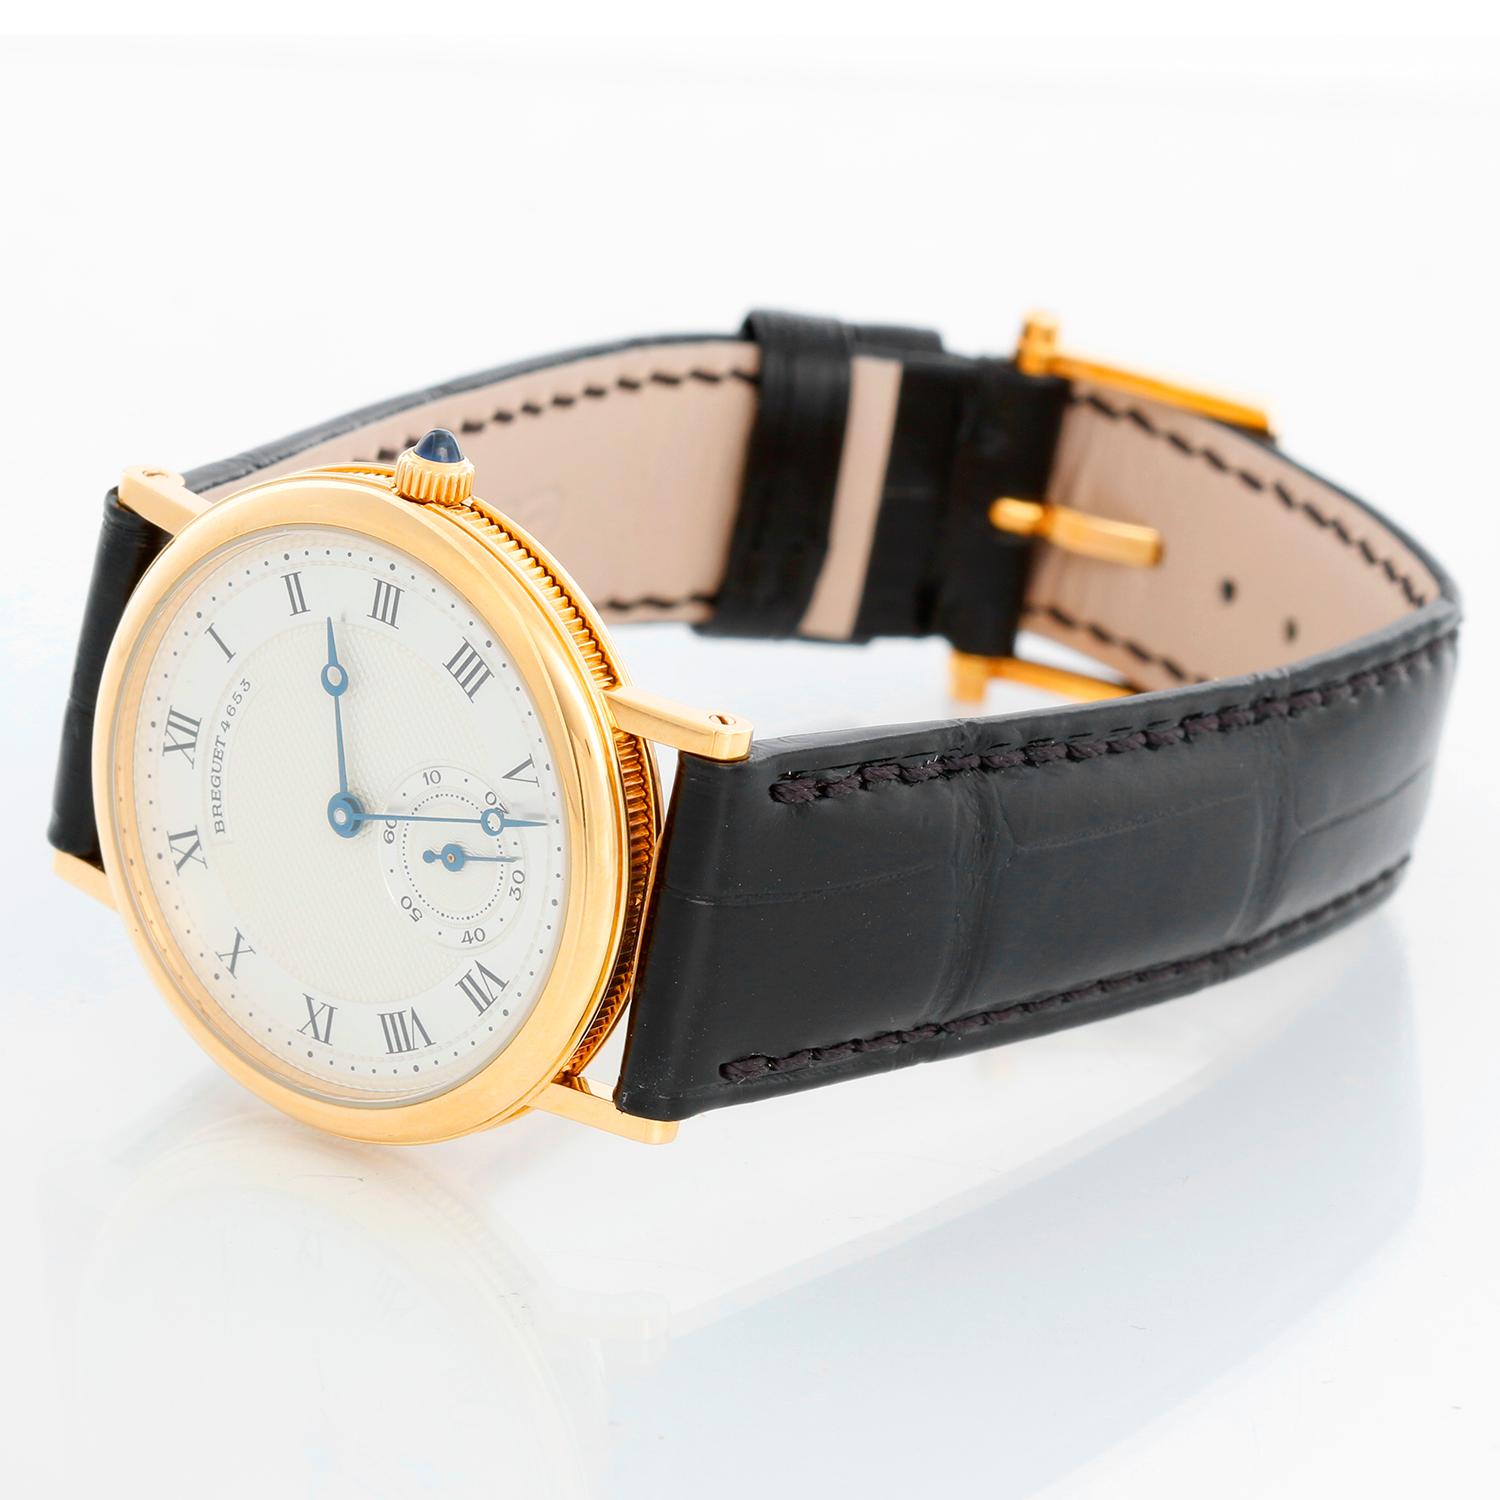 Breguet Classique 18k Yellow Gold Watch Ref 3290/2 - Manual winding. 18k yellow gold case ( 33 mm ). Two-tone silvered black Roman numerals, guilloche center. Brand new black leather Breguet  band with 18K Yellow gold tang buckle. Pre-owned with